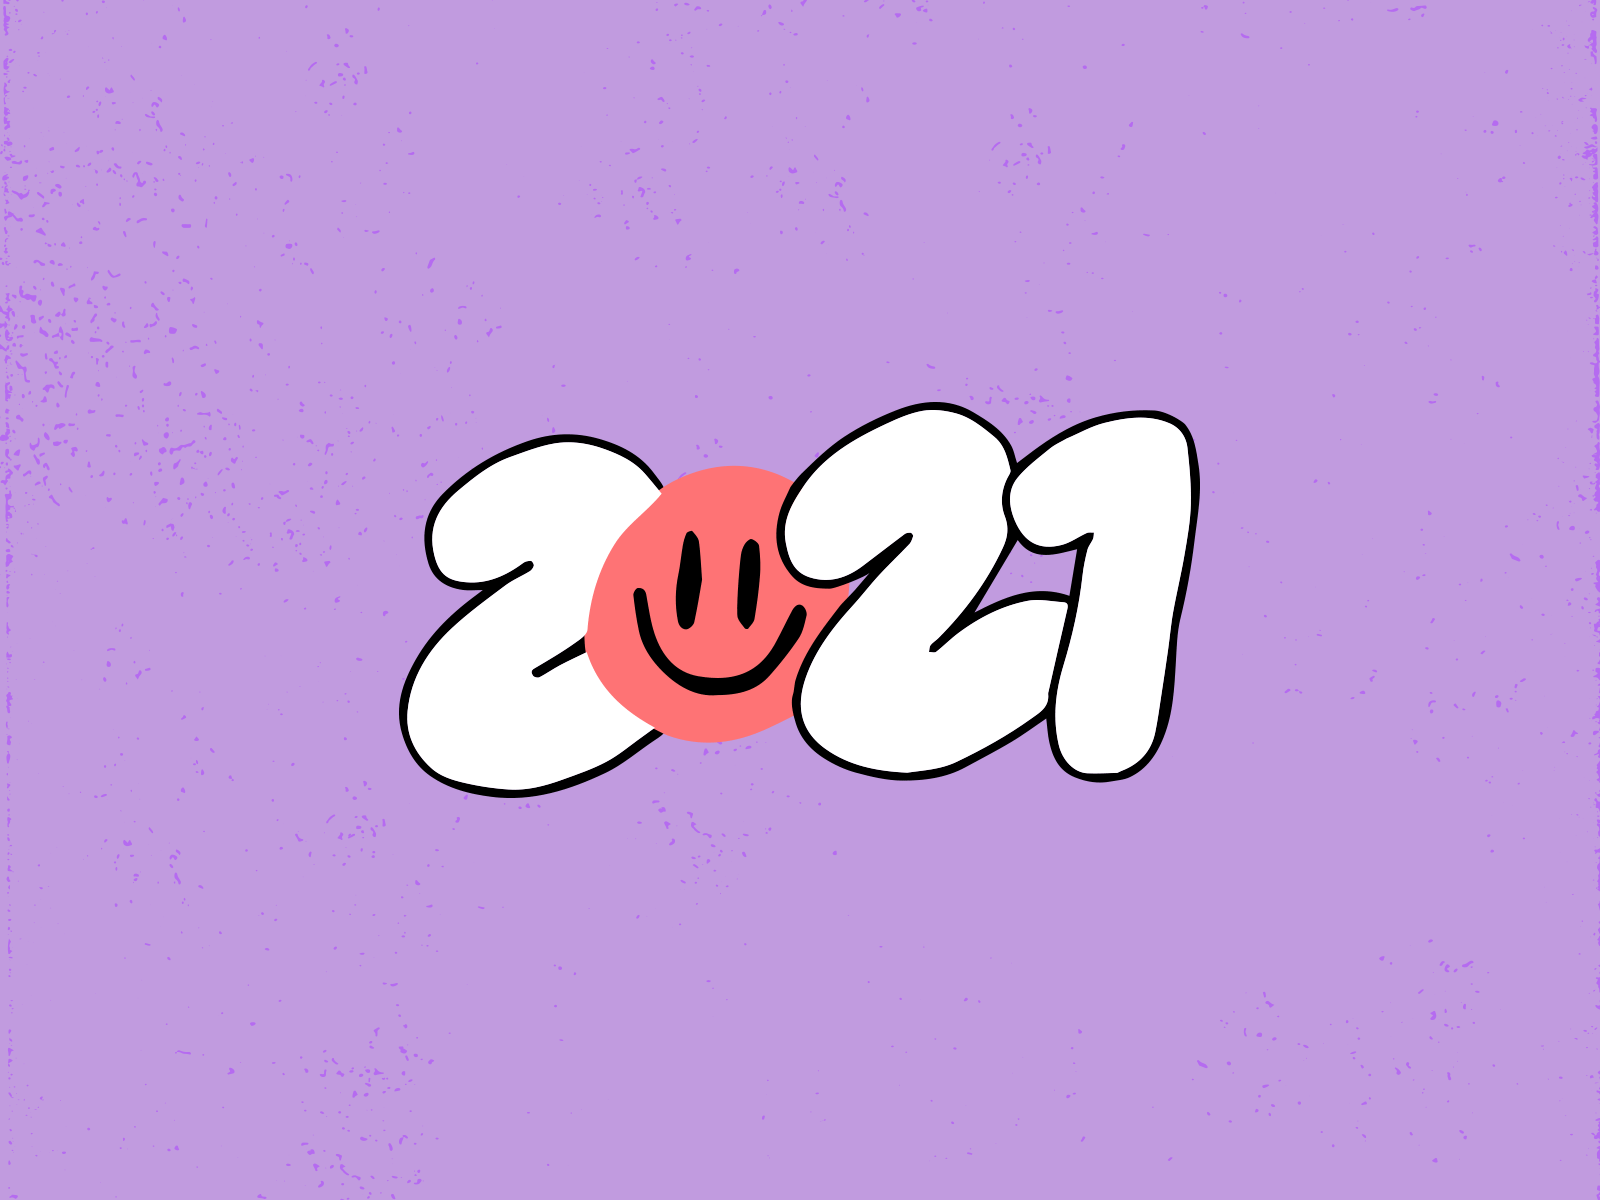 2021 2021 face illustration letters lines pink purple rough smiley texture vector wiggle year